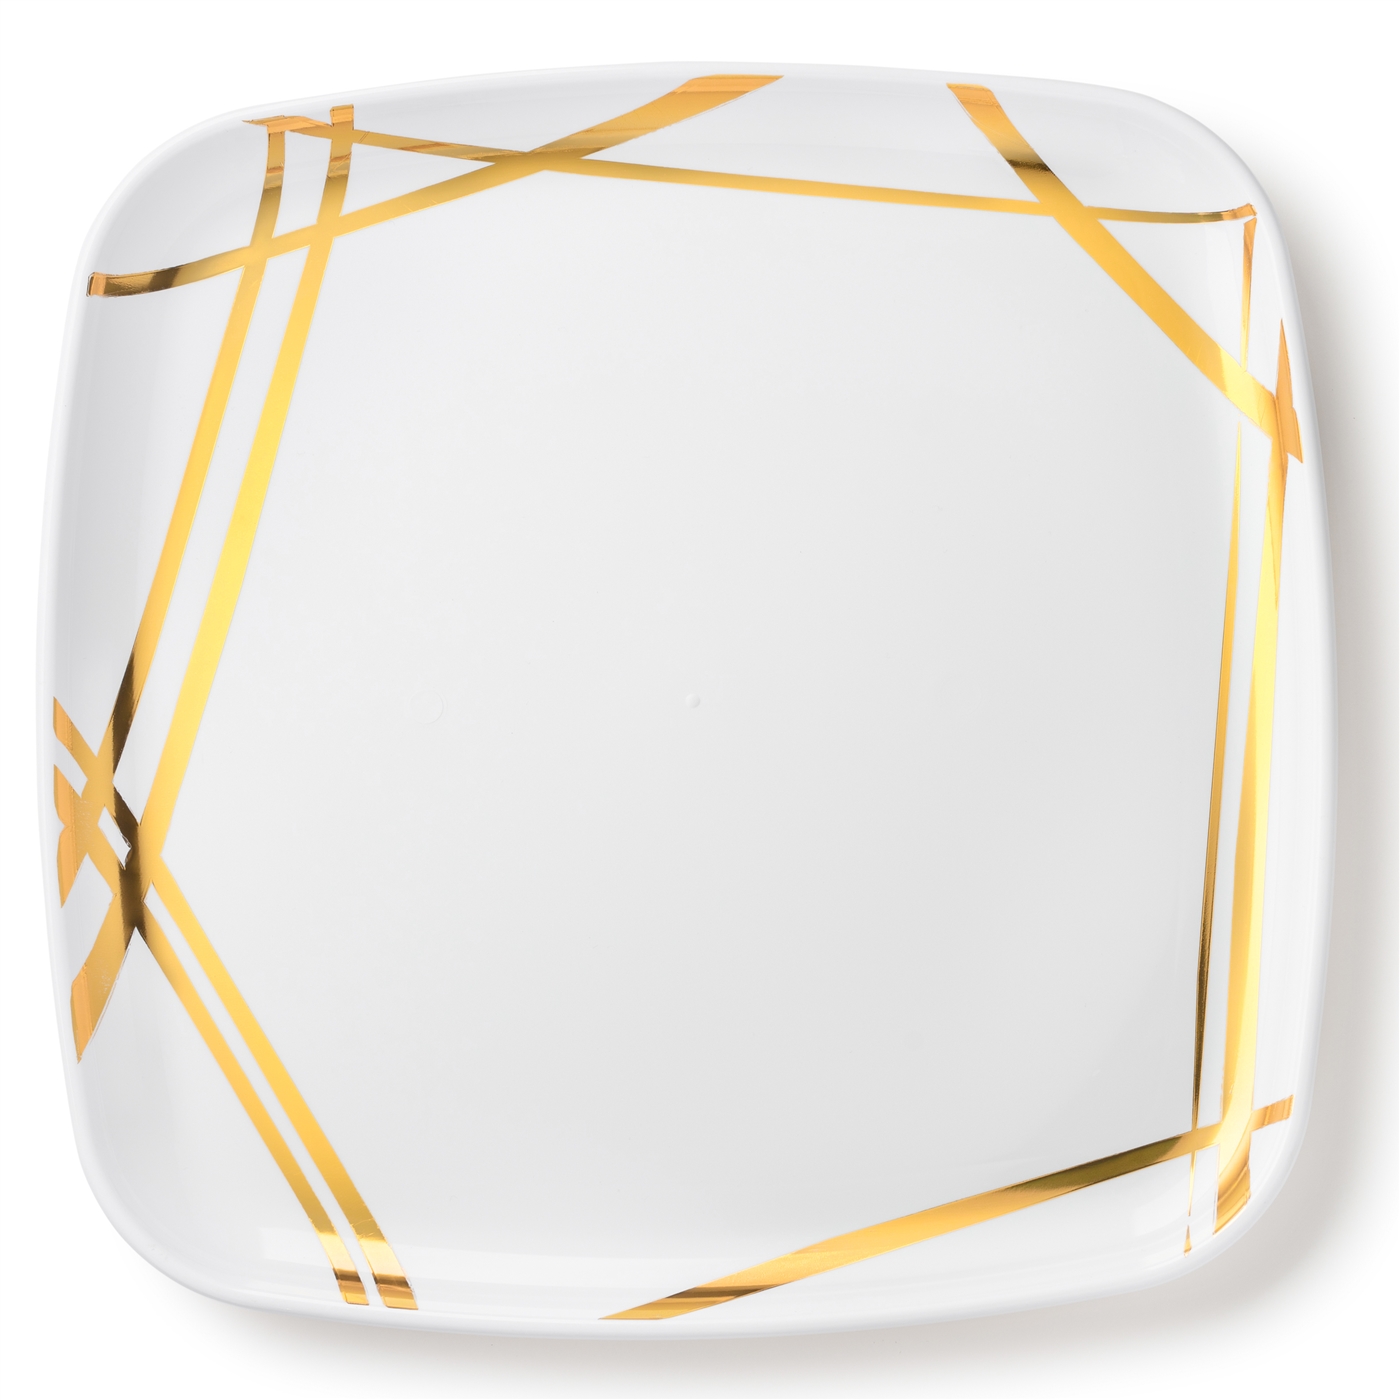 Decor Twist Collection Big Square Serving Tray